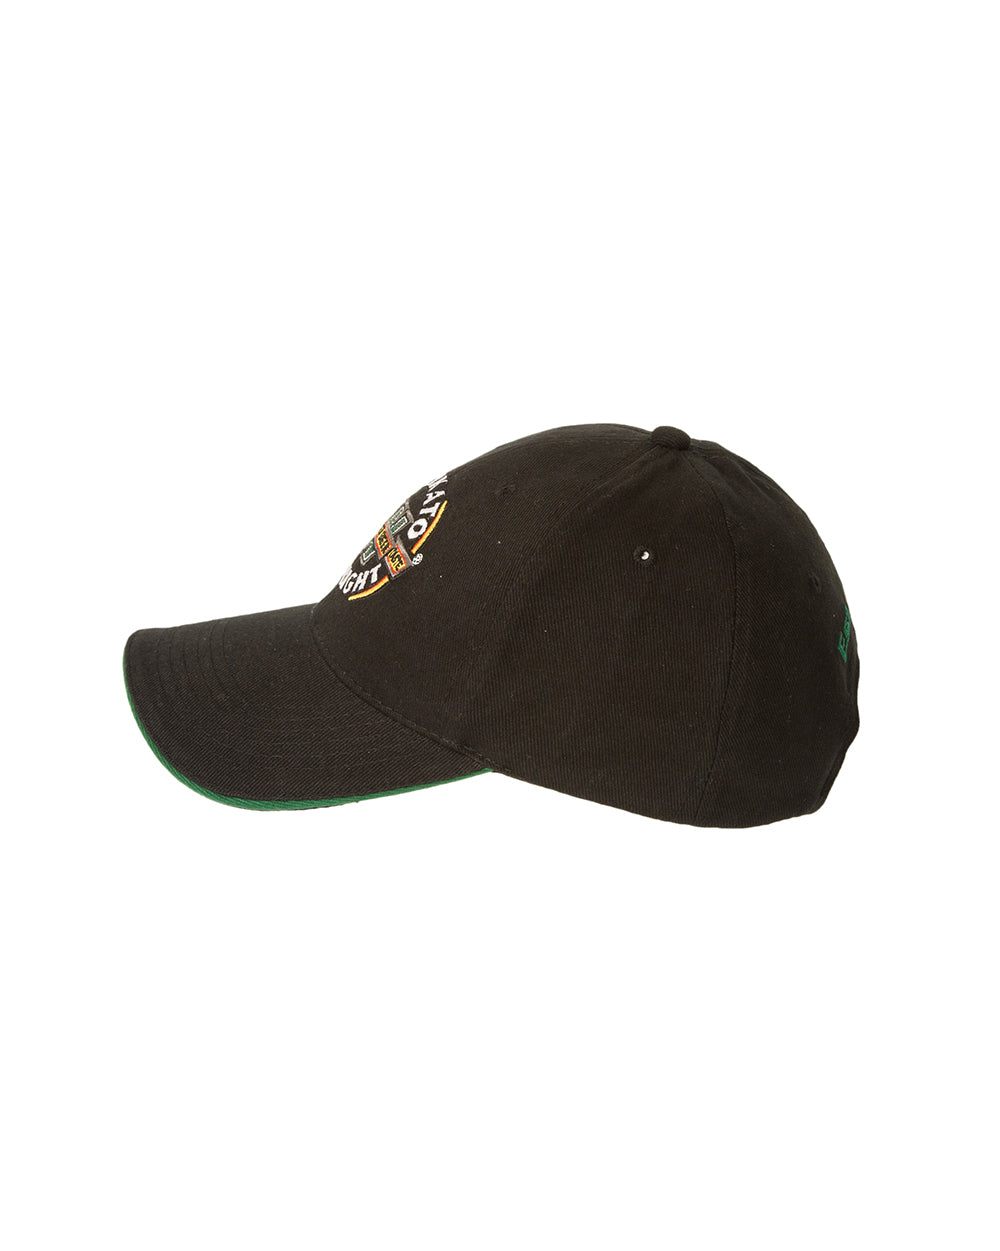 Waikato Draught Cap -  Beer Gear Apparel & Merchandise - Speights - Lion Red - VB - Tokyo Dy merch